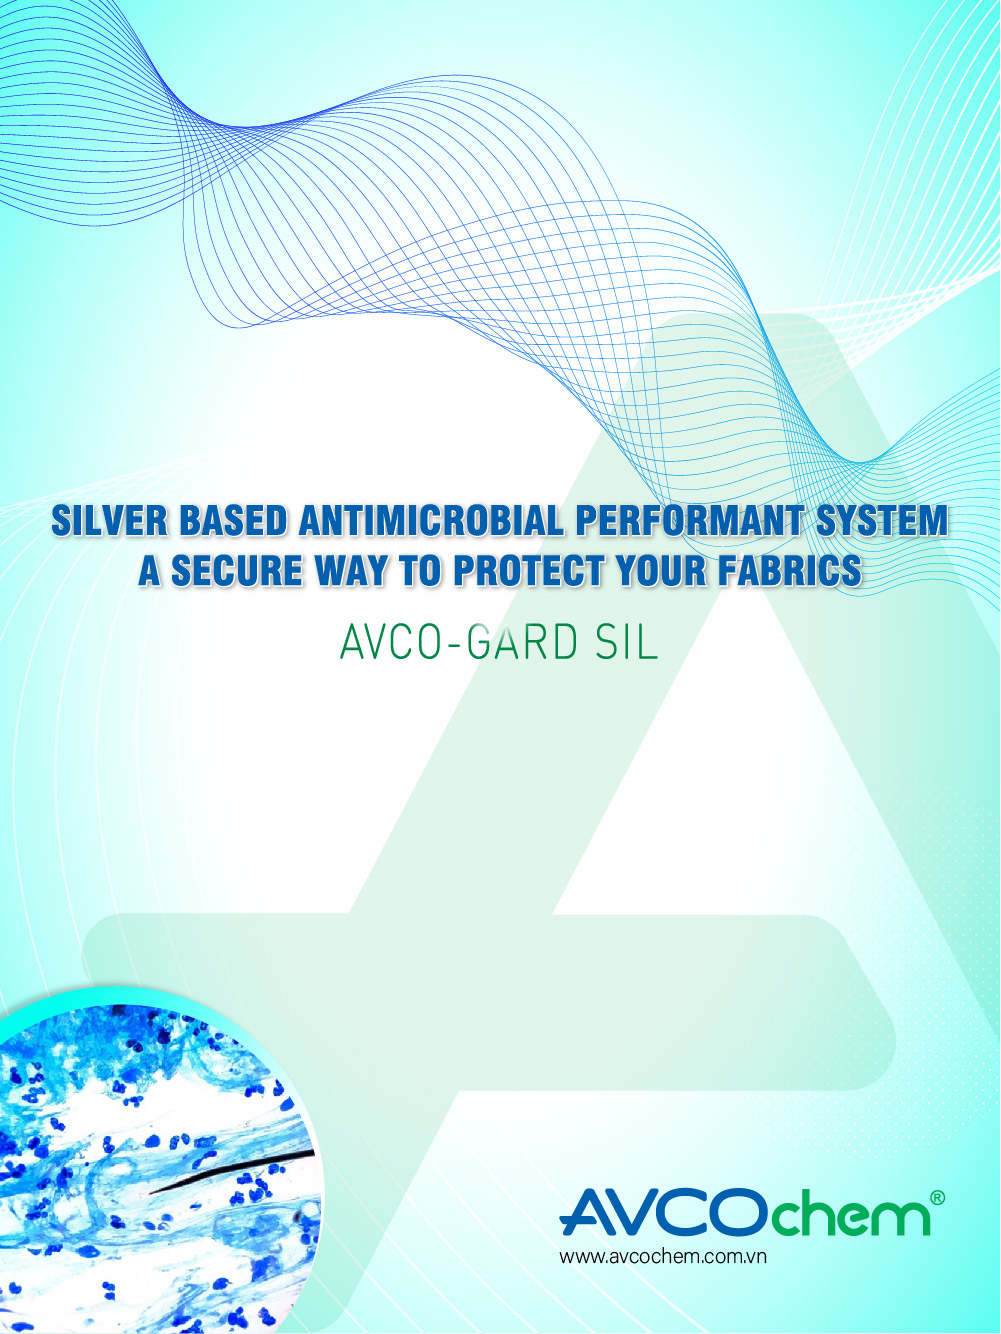 SILVER BASED ANTI-MICROBIAL PERFORMANT SYSTEM - A SECURE WAY TO PROTECT YOUR FABRICS